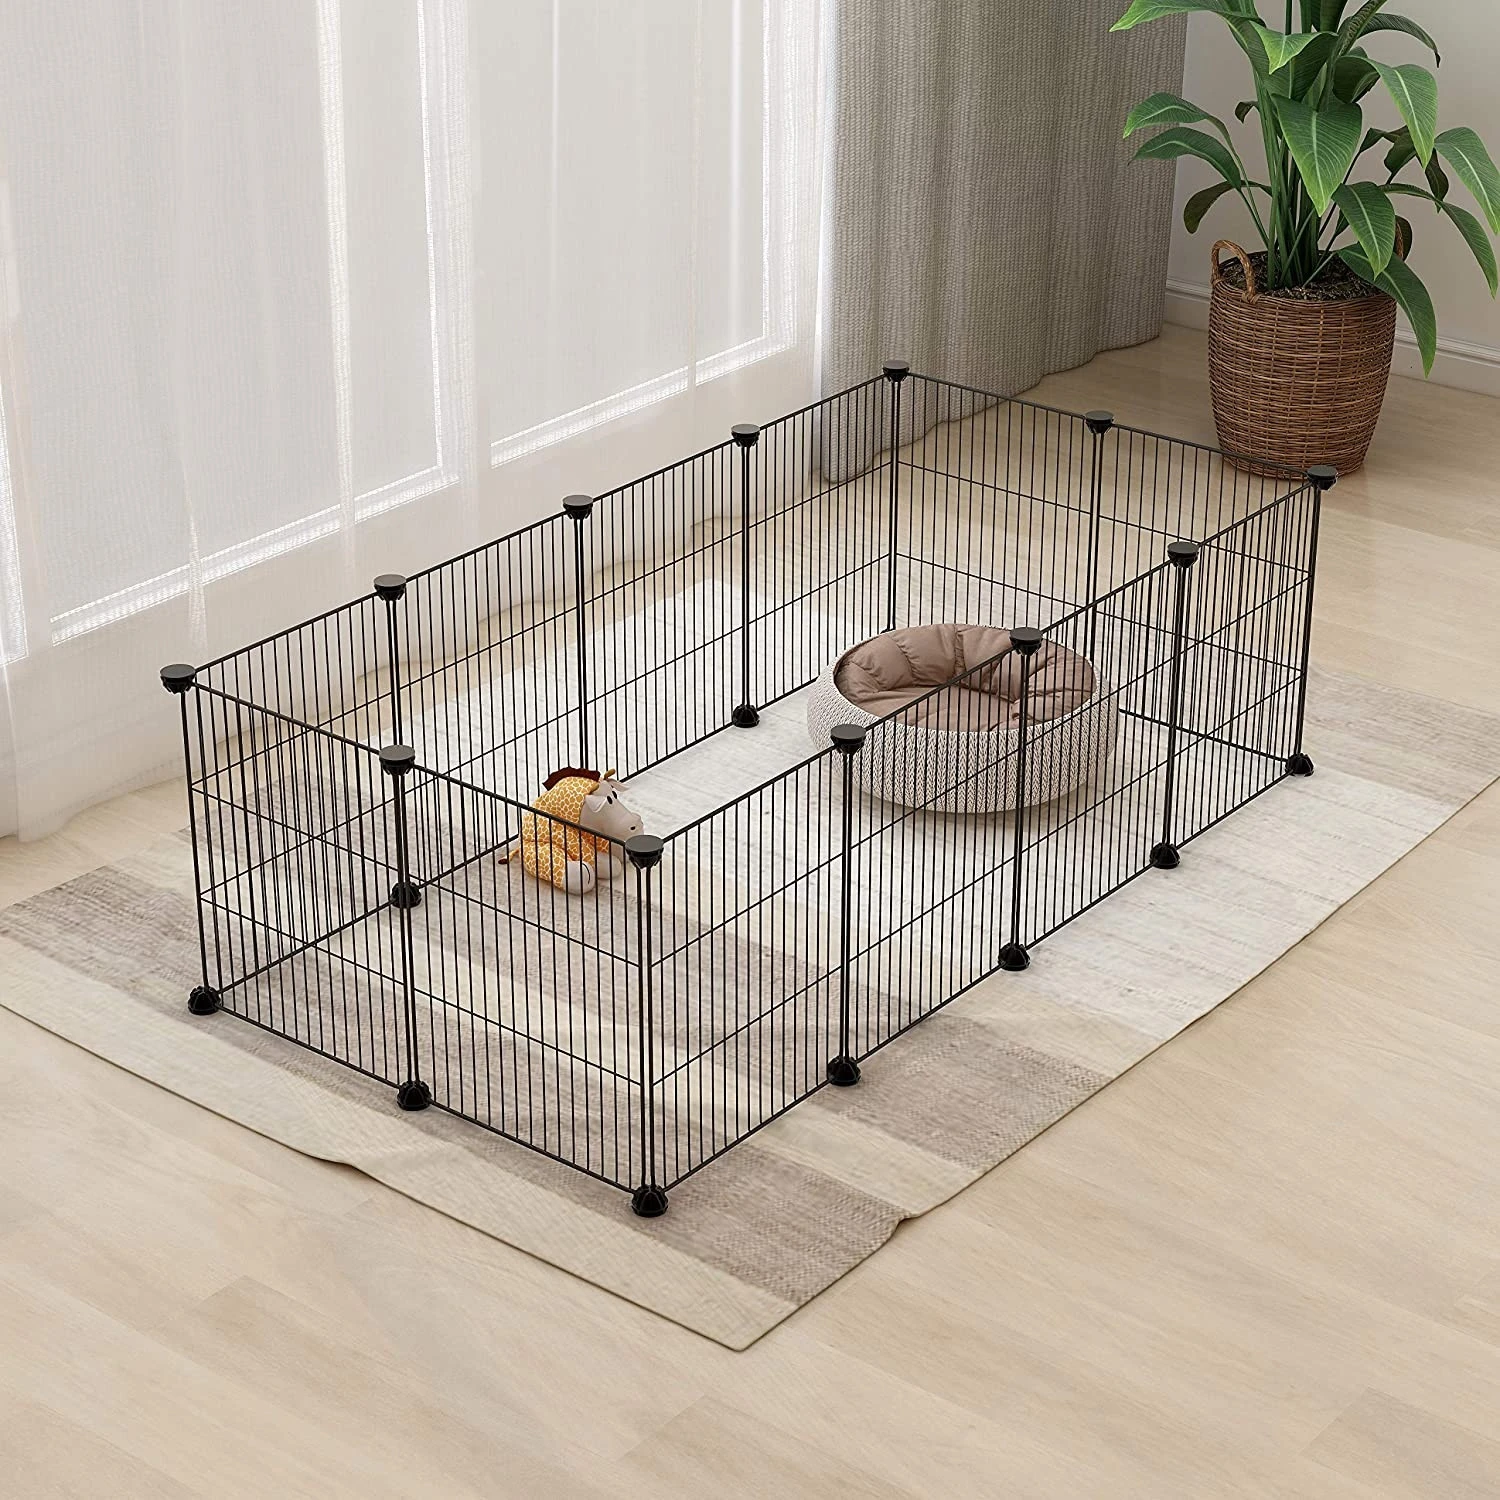 China Wholesale Pet Playpen Exercise Playpen Portable Metal Small Animal Crate Tent Fence Cage and Playpen